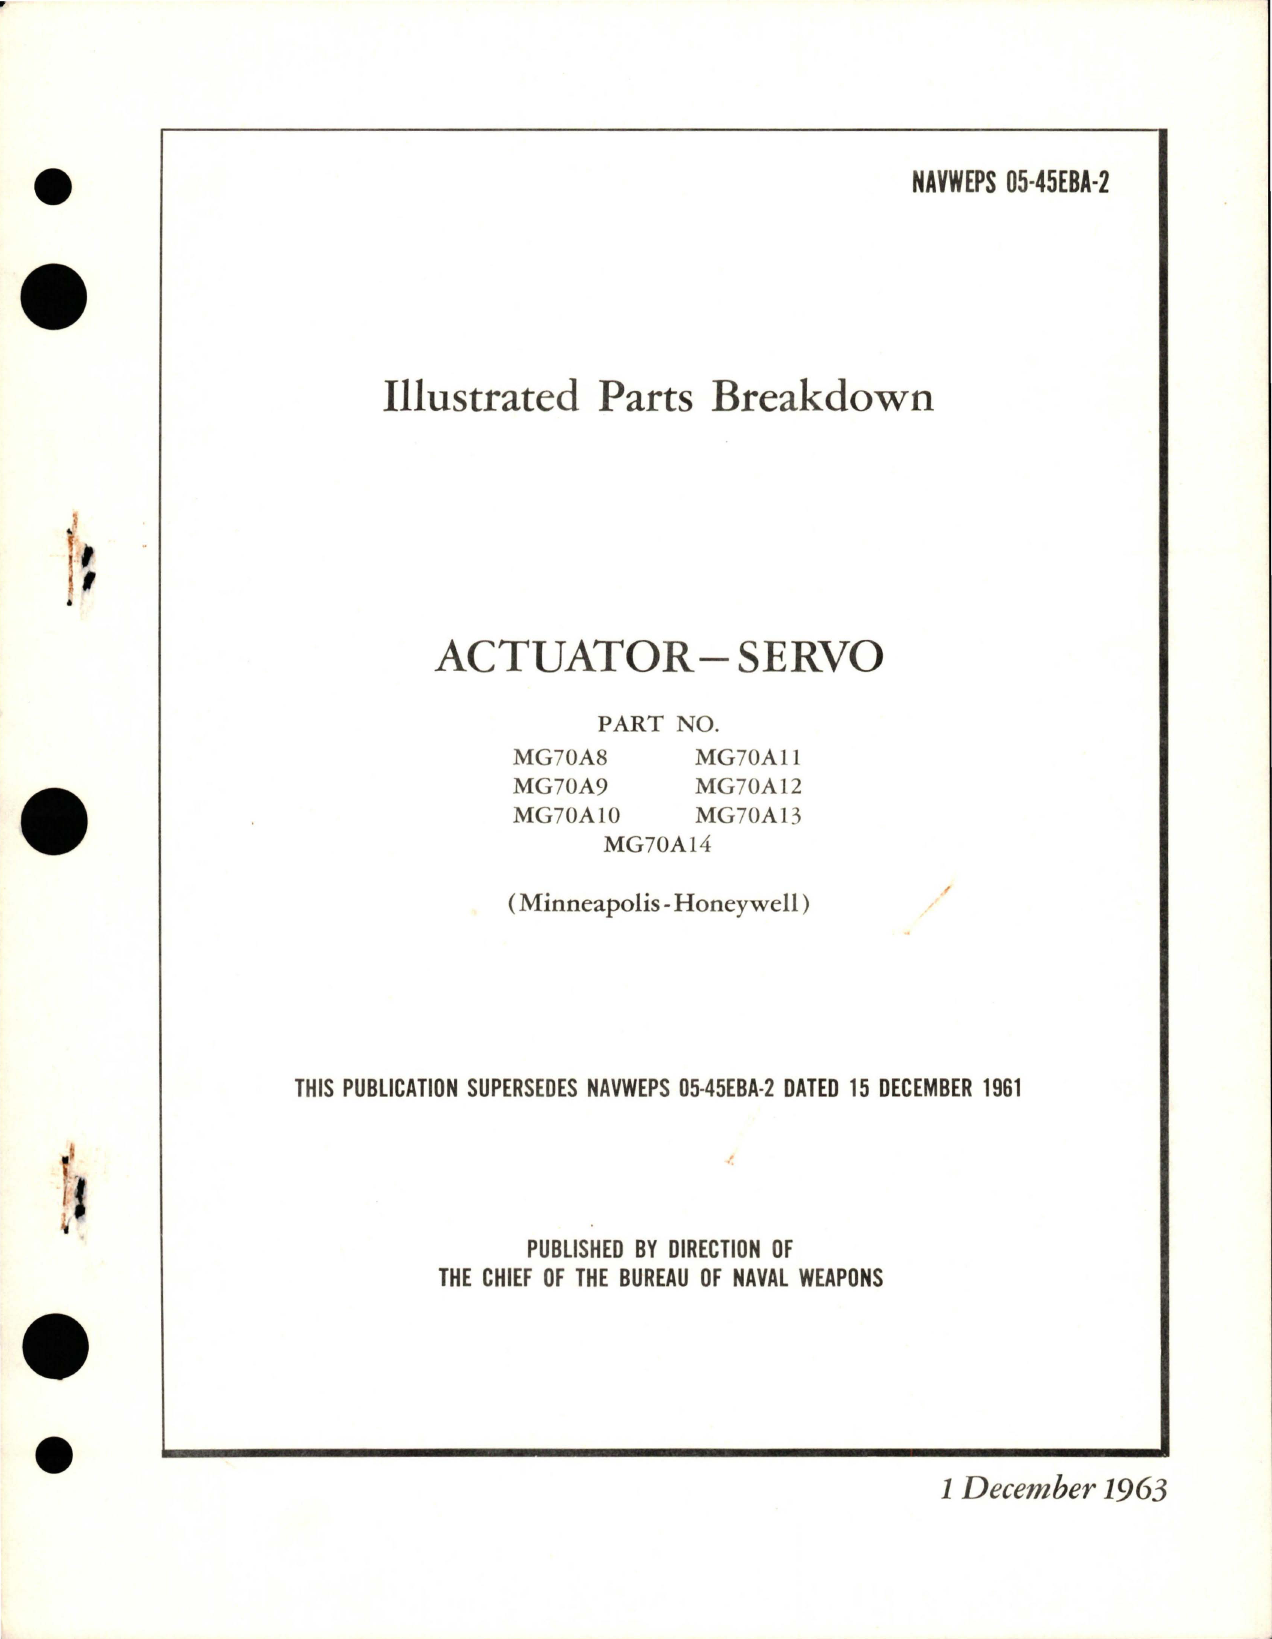 Sample page 1 from AirCorps Library document: Illustrated Parts Breakdown for Actuator-Servo